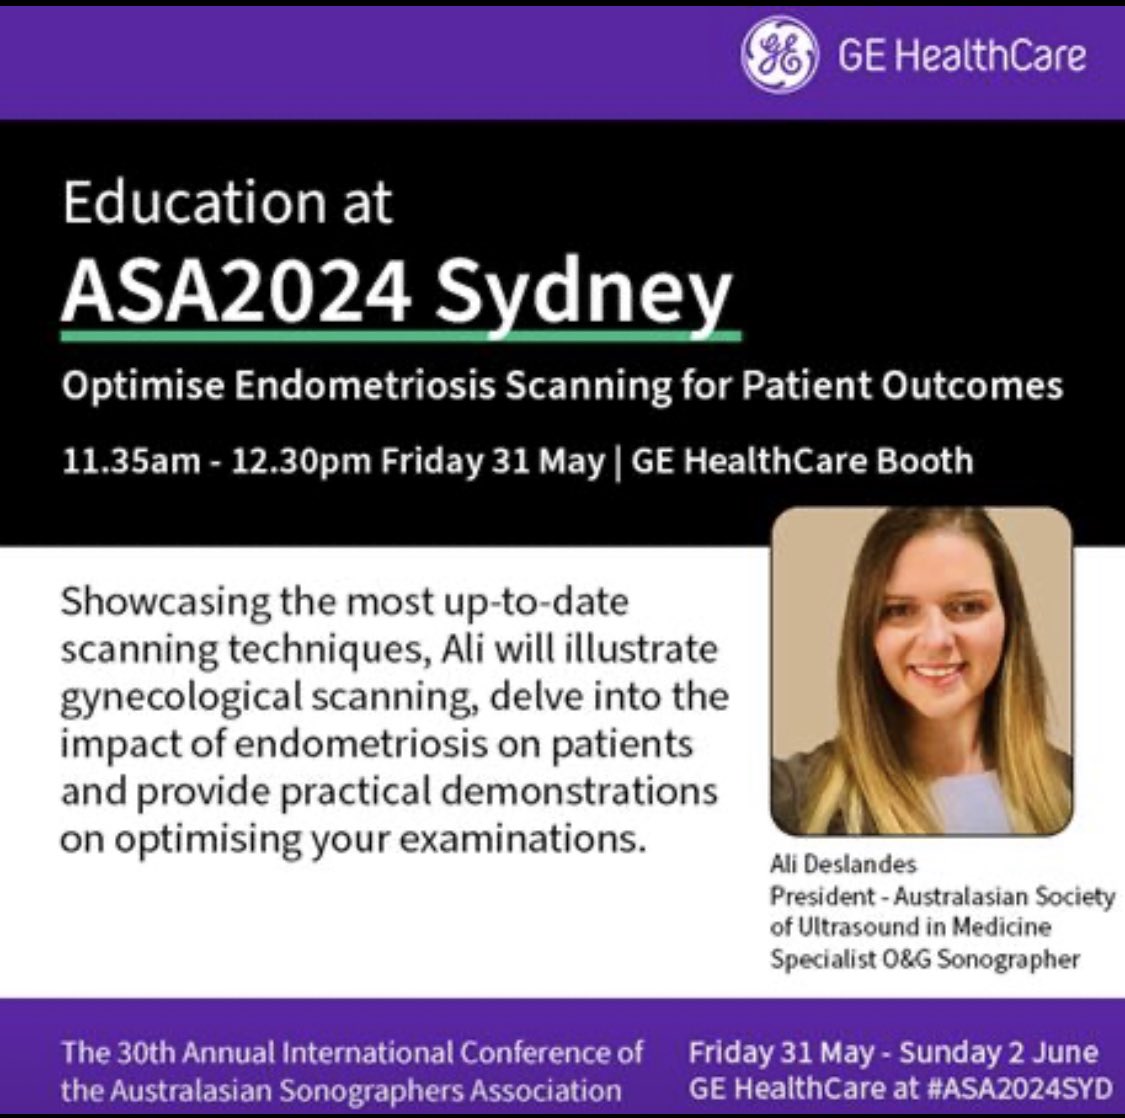 Come join me and @GEHealthCare at #ASA2024 to discuss gynae #ultrasound and #endometriosis. I will be showing key scanning techniques utilising the latest Voluson Expert22 ultrasound technology to help all sonographers improve their patients lives with ultrasound diagnosis